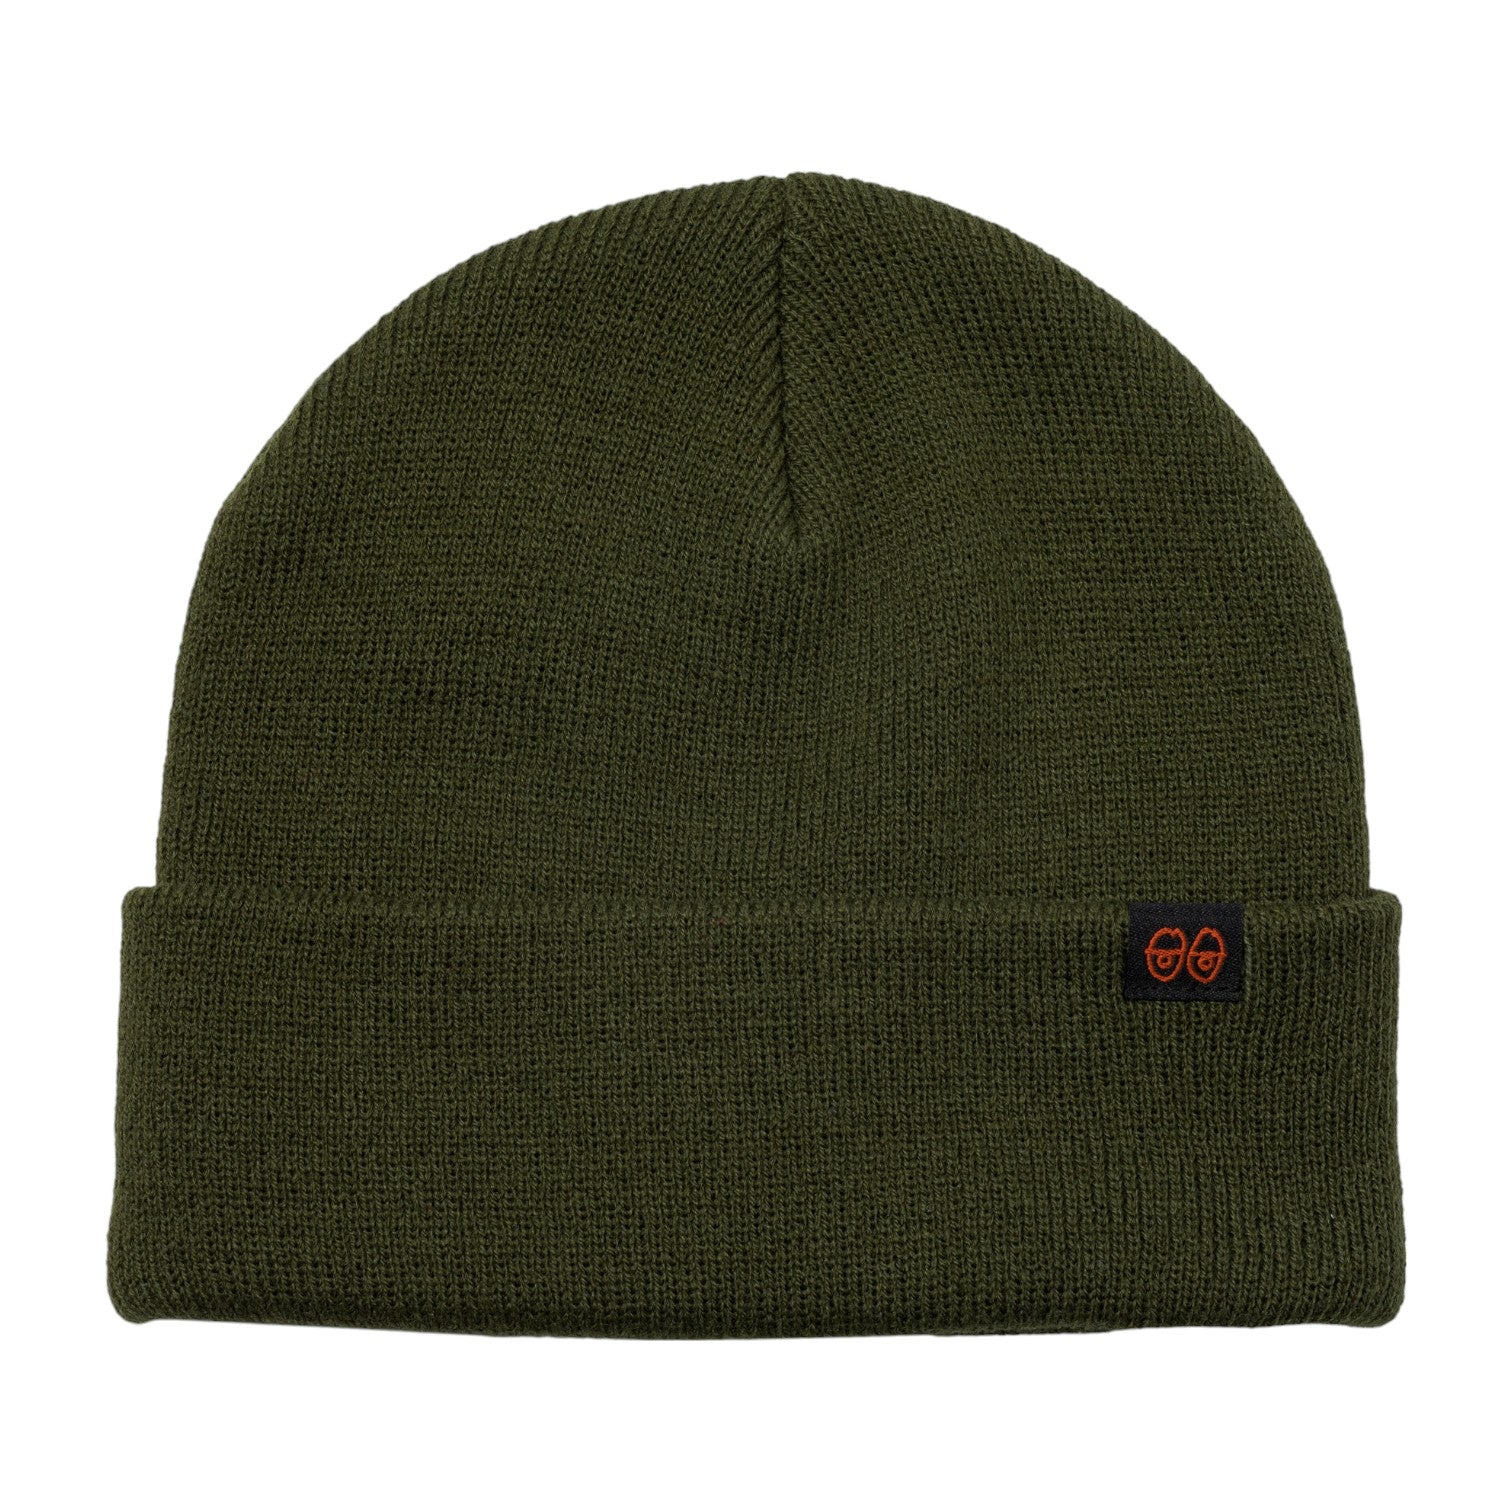 Krooked Eyes Clip Cuff Beanie - Olive/Red